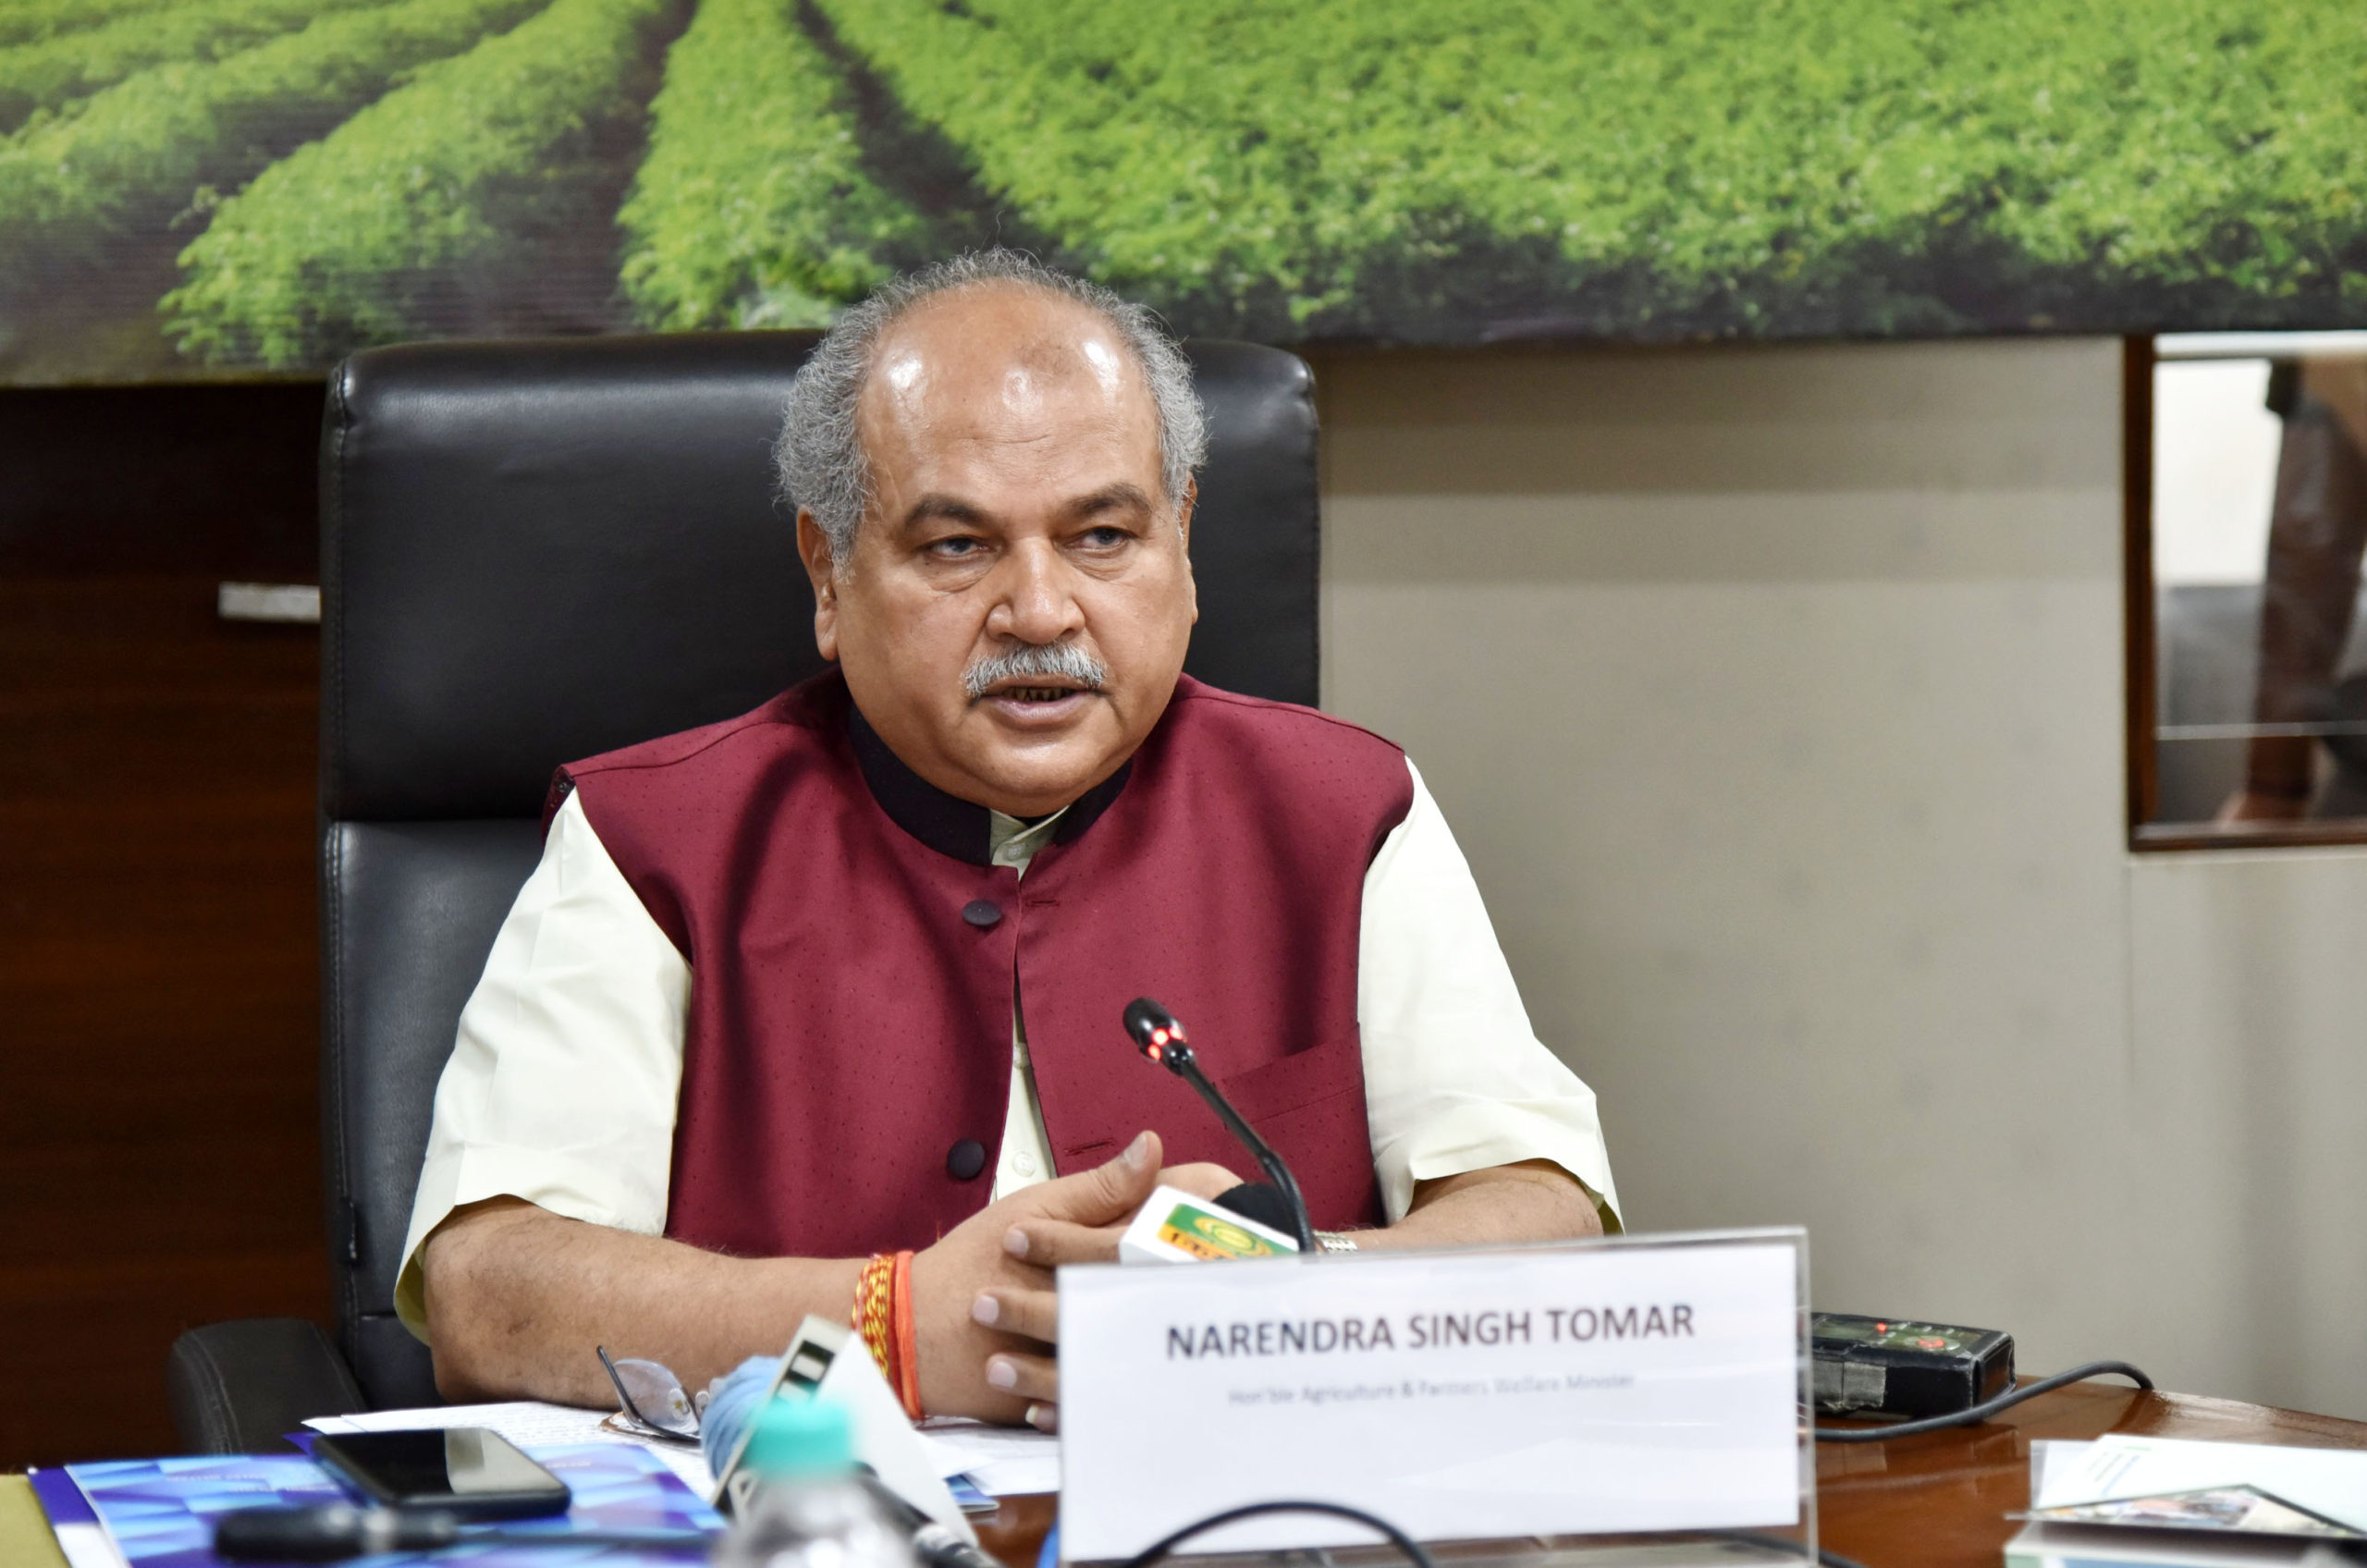 The Union Minister for Agriculture Farmers Welfare Rural Development and Panchayati Raj Narendra Singh Tomar